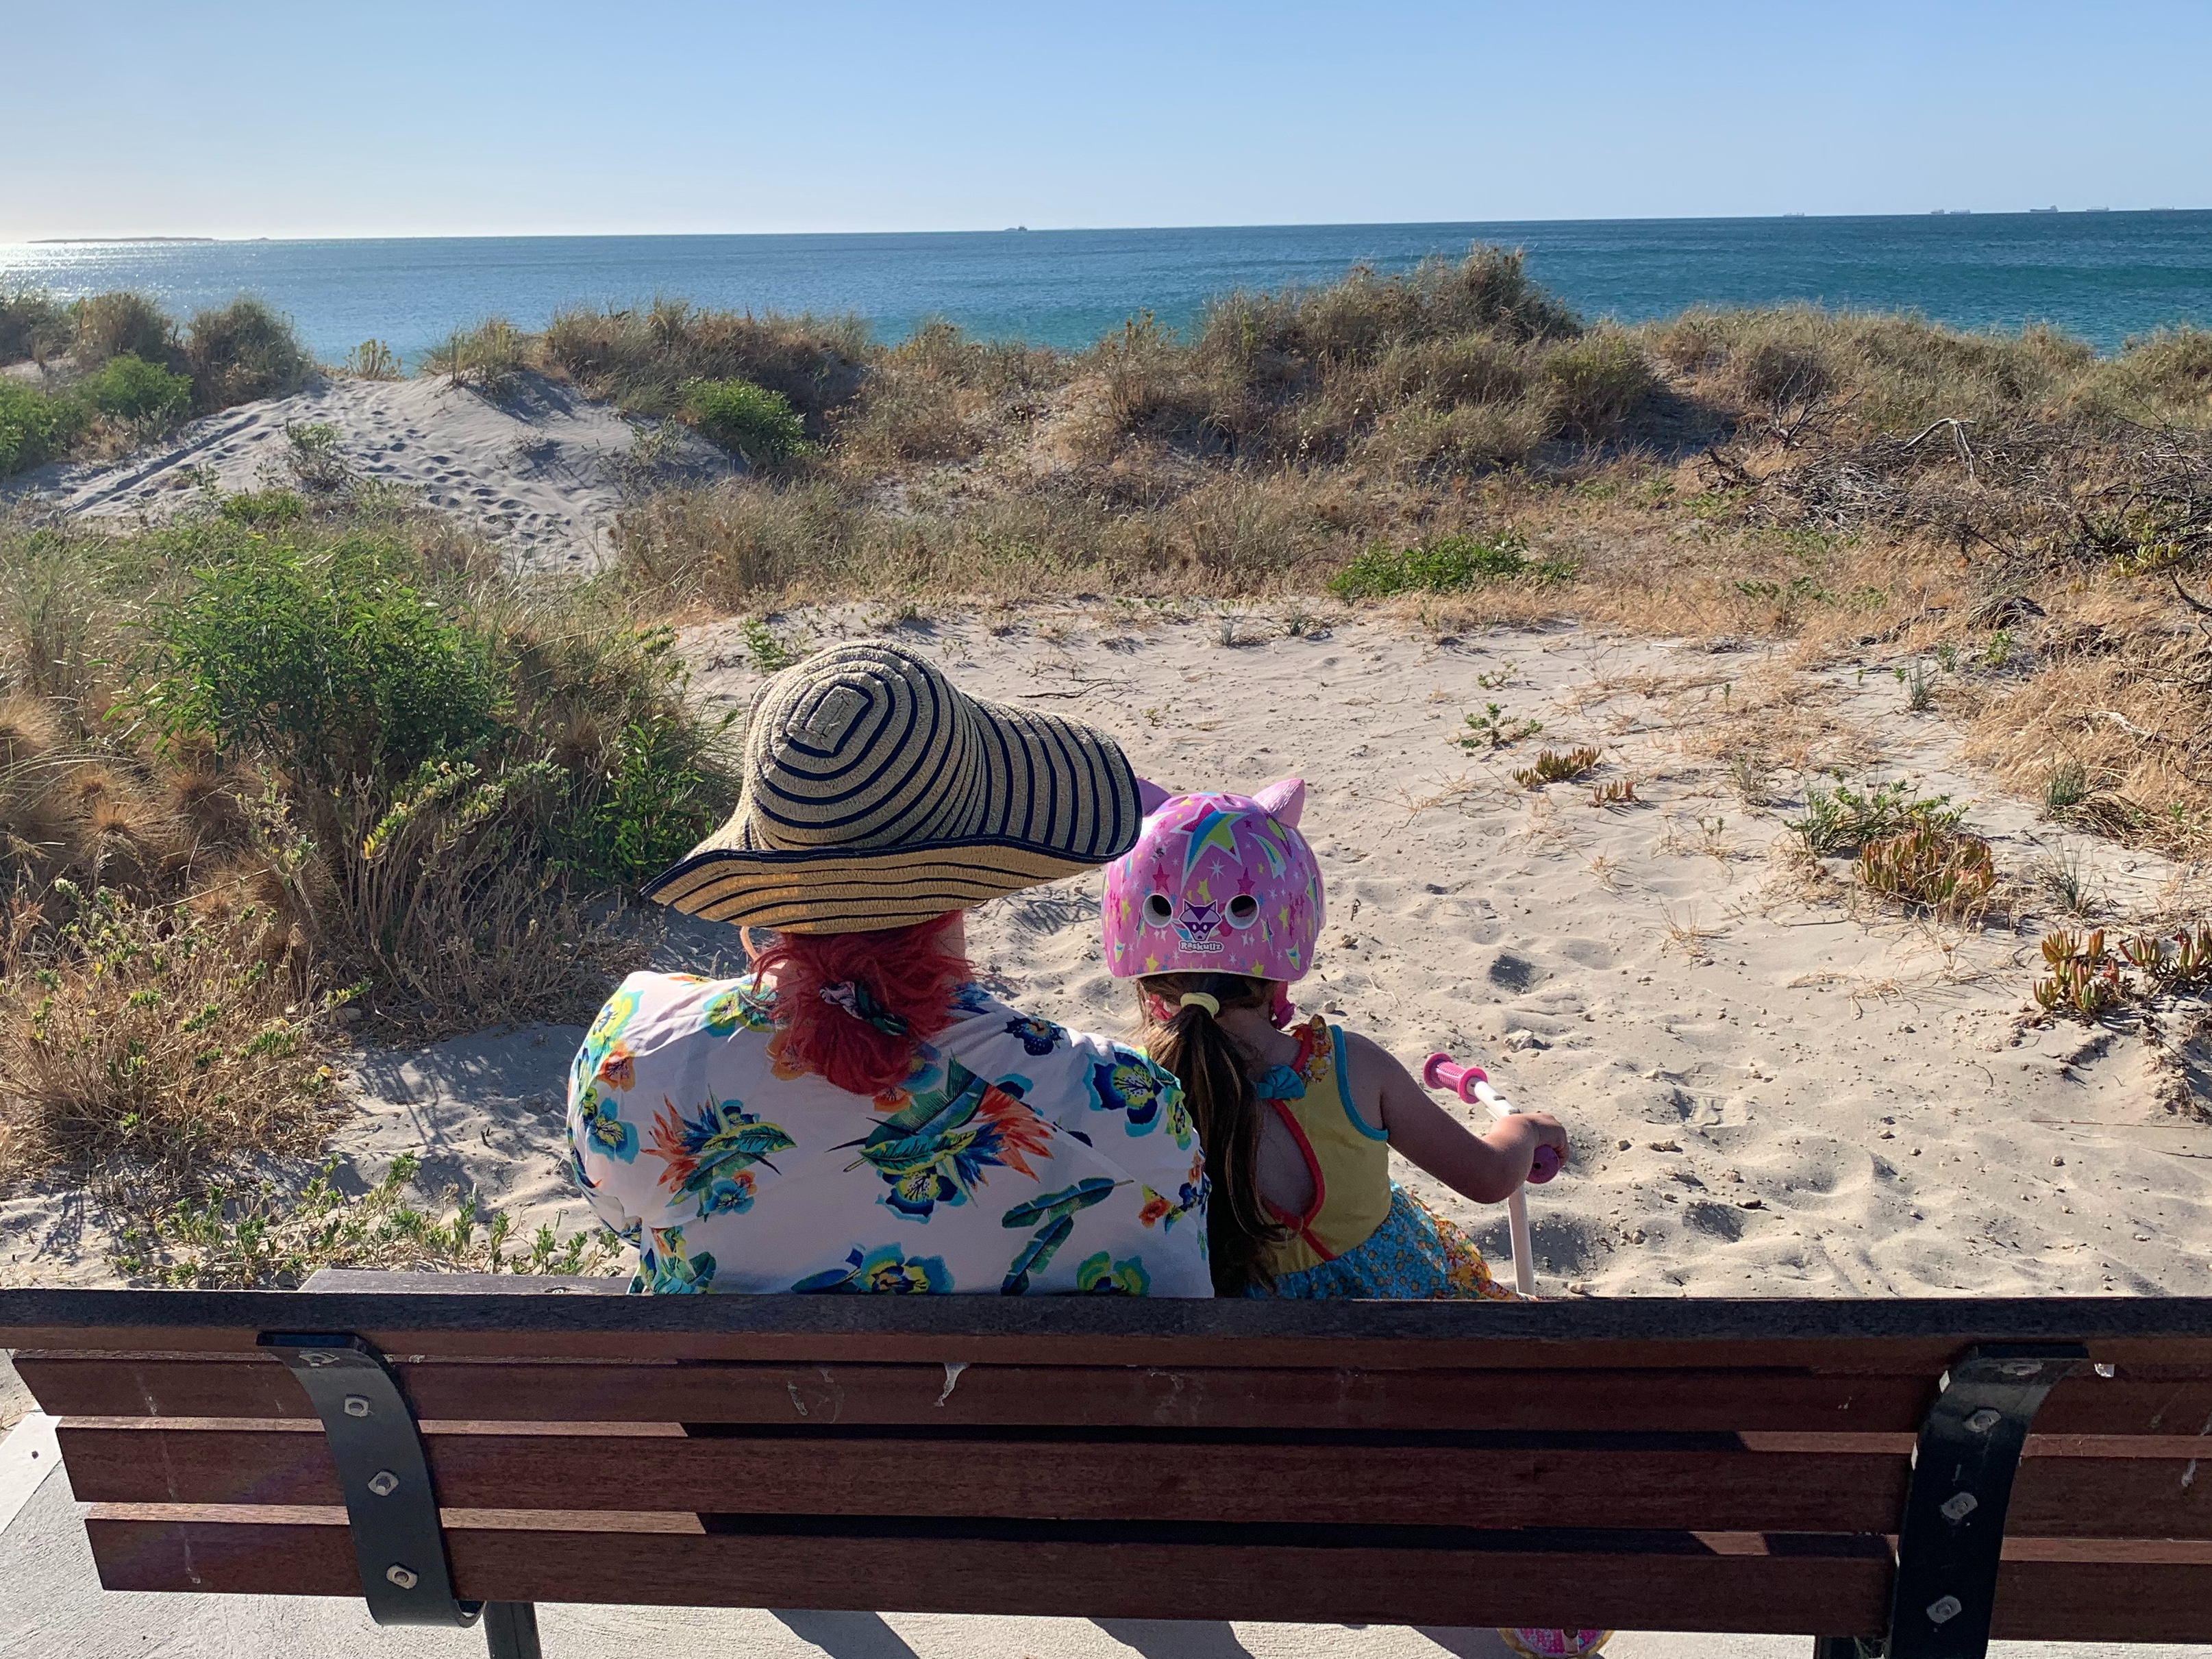 woman with stripy hat, floral shirt and red hair facing away on a bench, a young girl with long brown hair and a pink helmet next to her, both looking at the ocean which is visible over sand and grasses